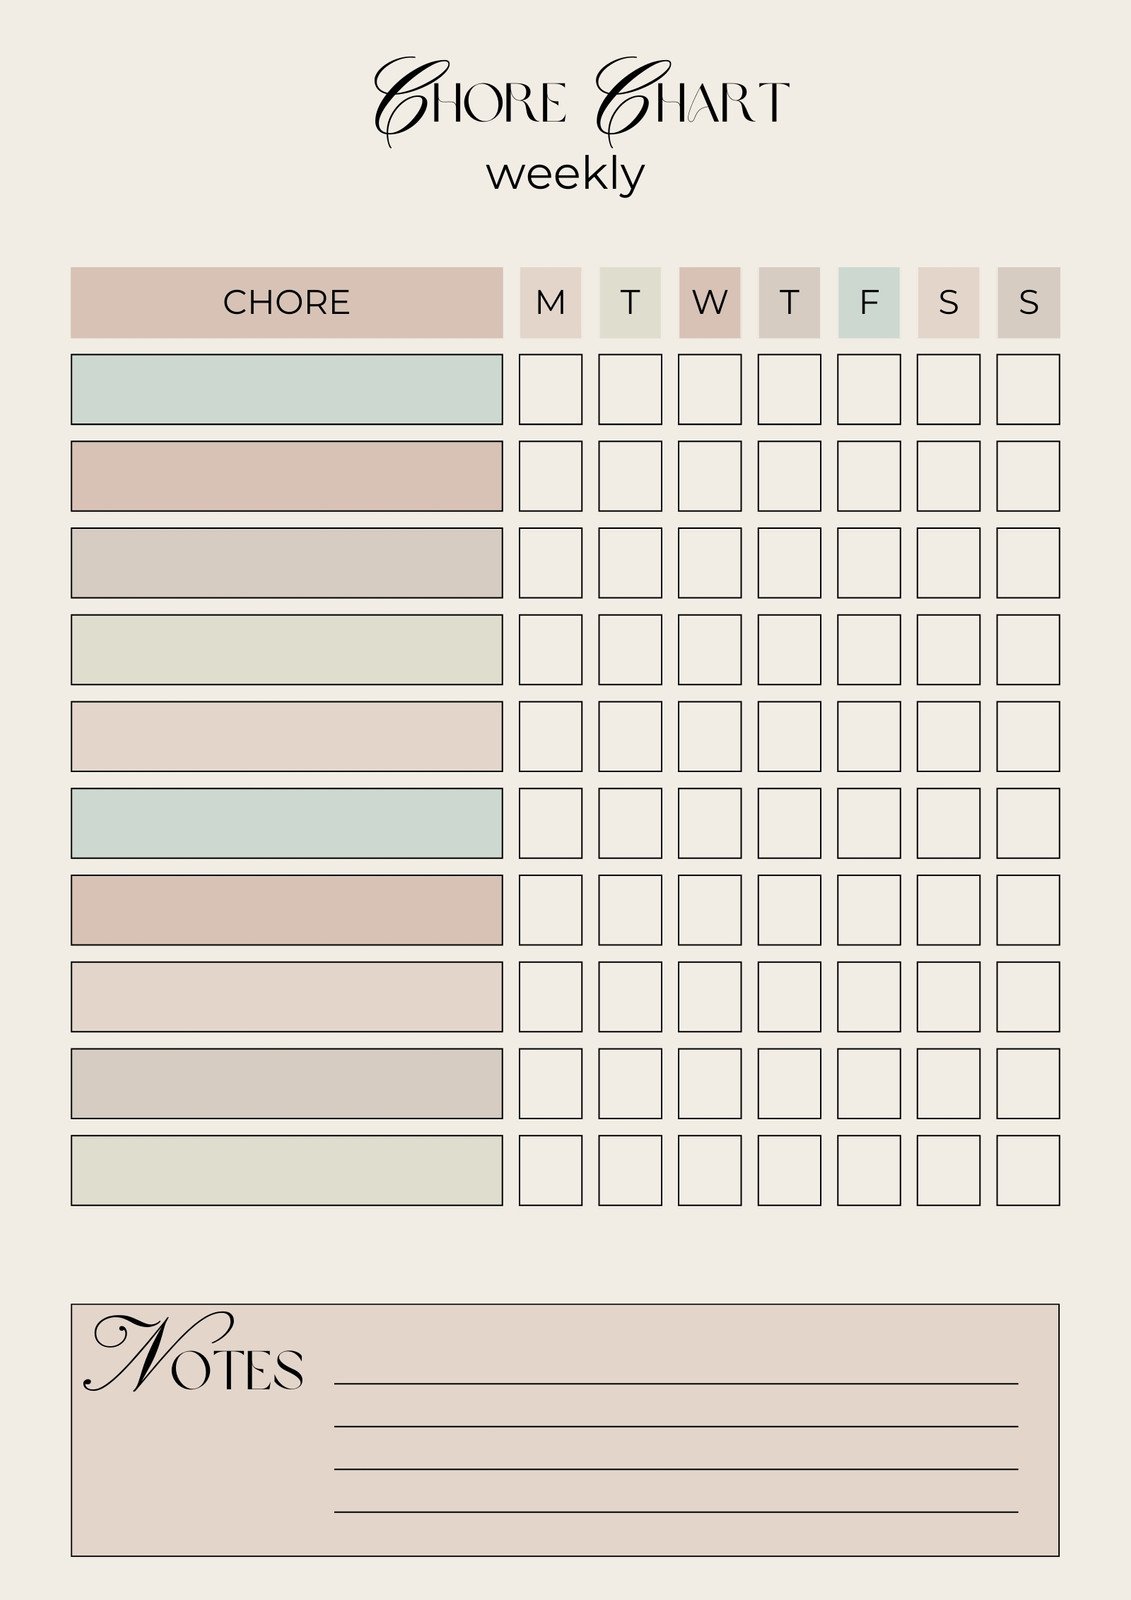 weekly-chore-checklist-template